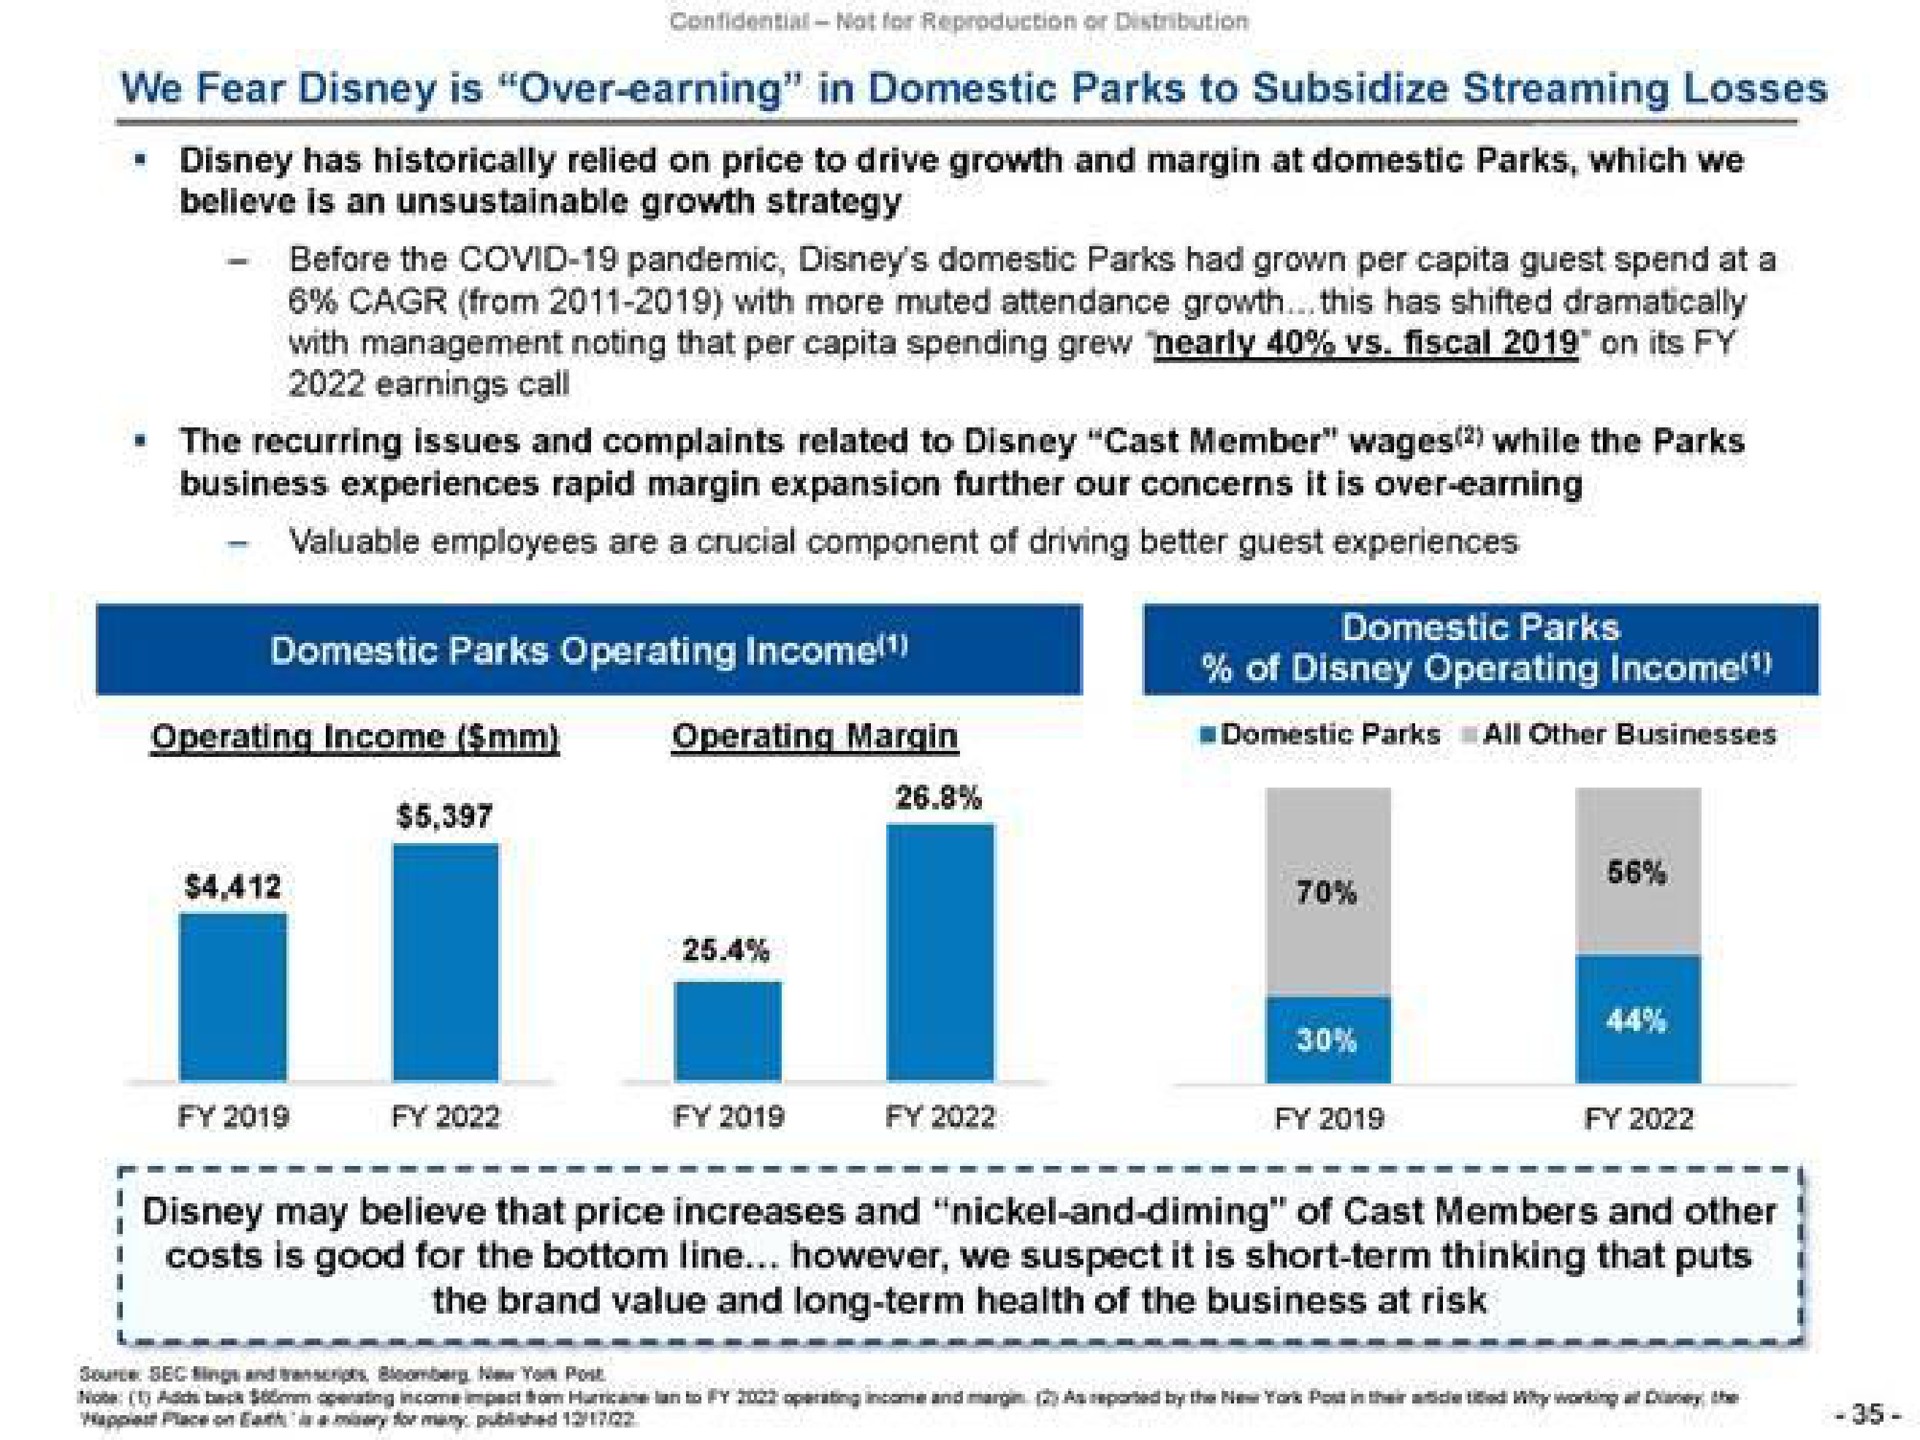 we fear is over earning in domestic parks to subsidize streaming losses has historically relied on price to drive growth and margin at domestic parks which we believe is an unsustainable growth strategy with more muted attendance growth this has shifted dramatically earnings call the recurring issues and complaints related to cast member wages while the parks valuable employees are a crucial component of driving better guest experiences domestic parks operating income domestic parks of operating income may believe that price increases and nickel and diming of cast members arid other costs is good for the bottom line however we suspect it is short term thinking that puts the brand value and long term health of the business at risk i | Trian Partners